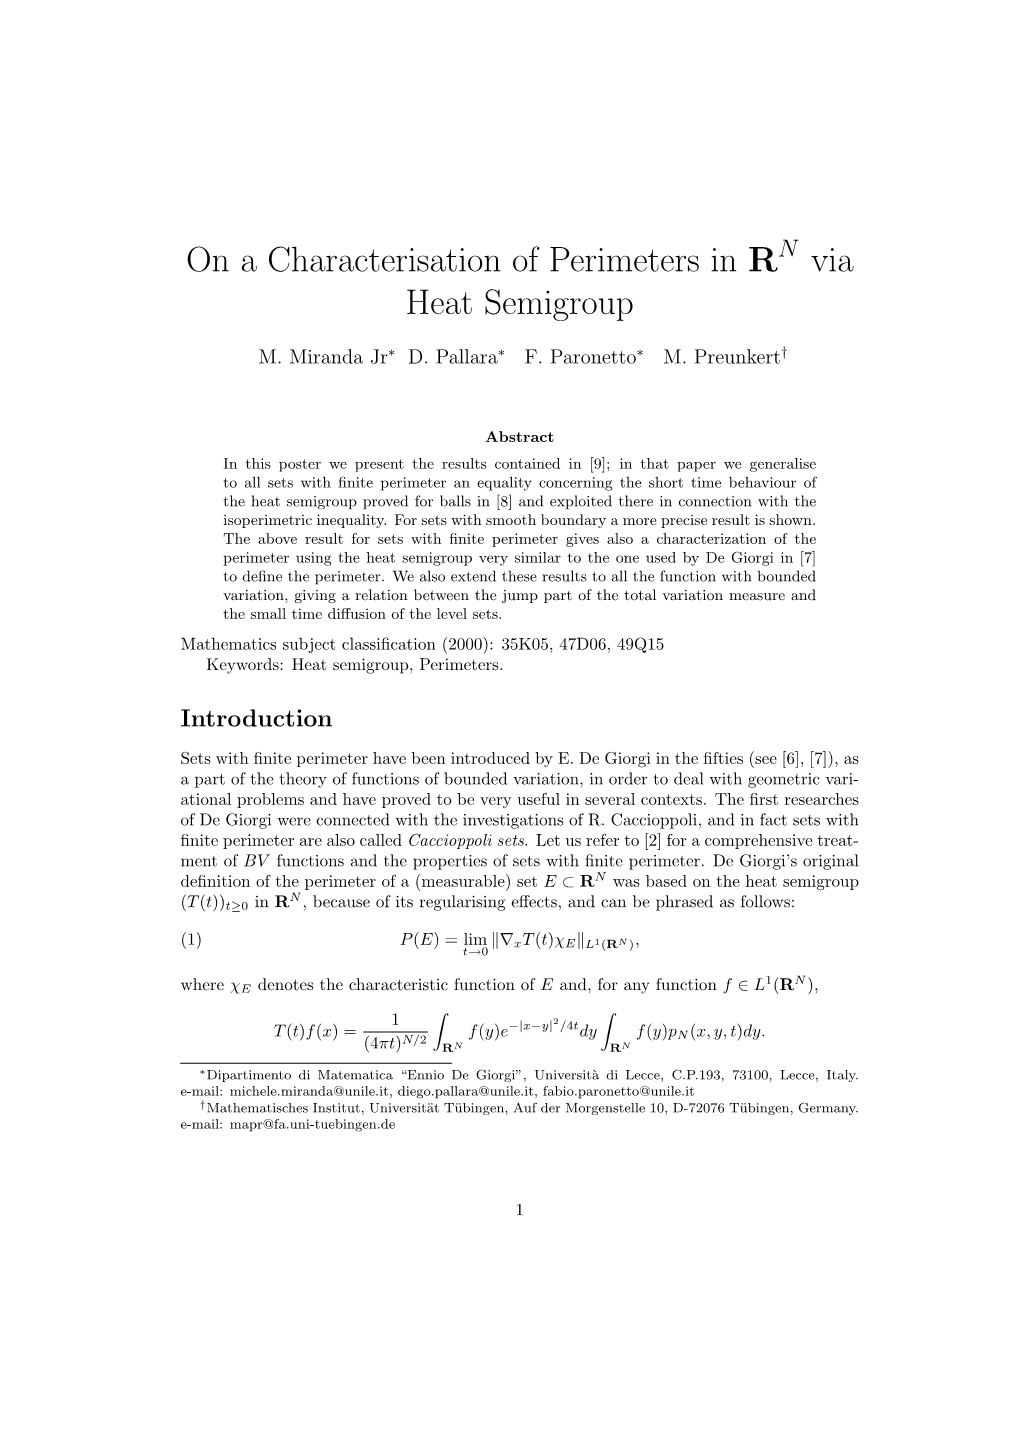 On a Characterisation of Perimeters in R Via Heat Semigroup